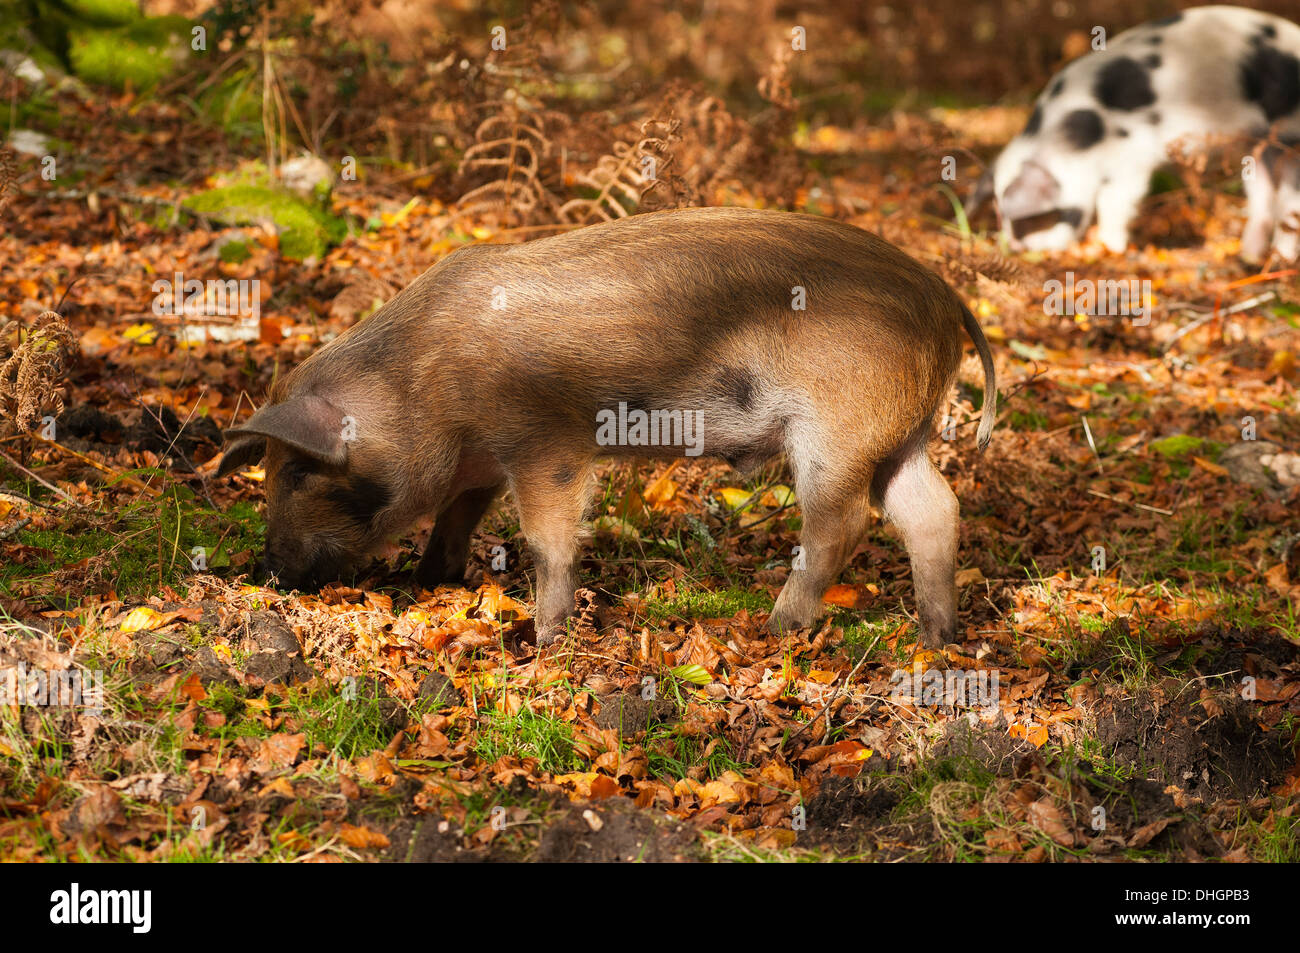 New Forest Pigs Foraging for Acorns The New Forest Hampshire England UK Stock Photo